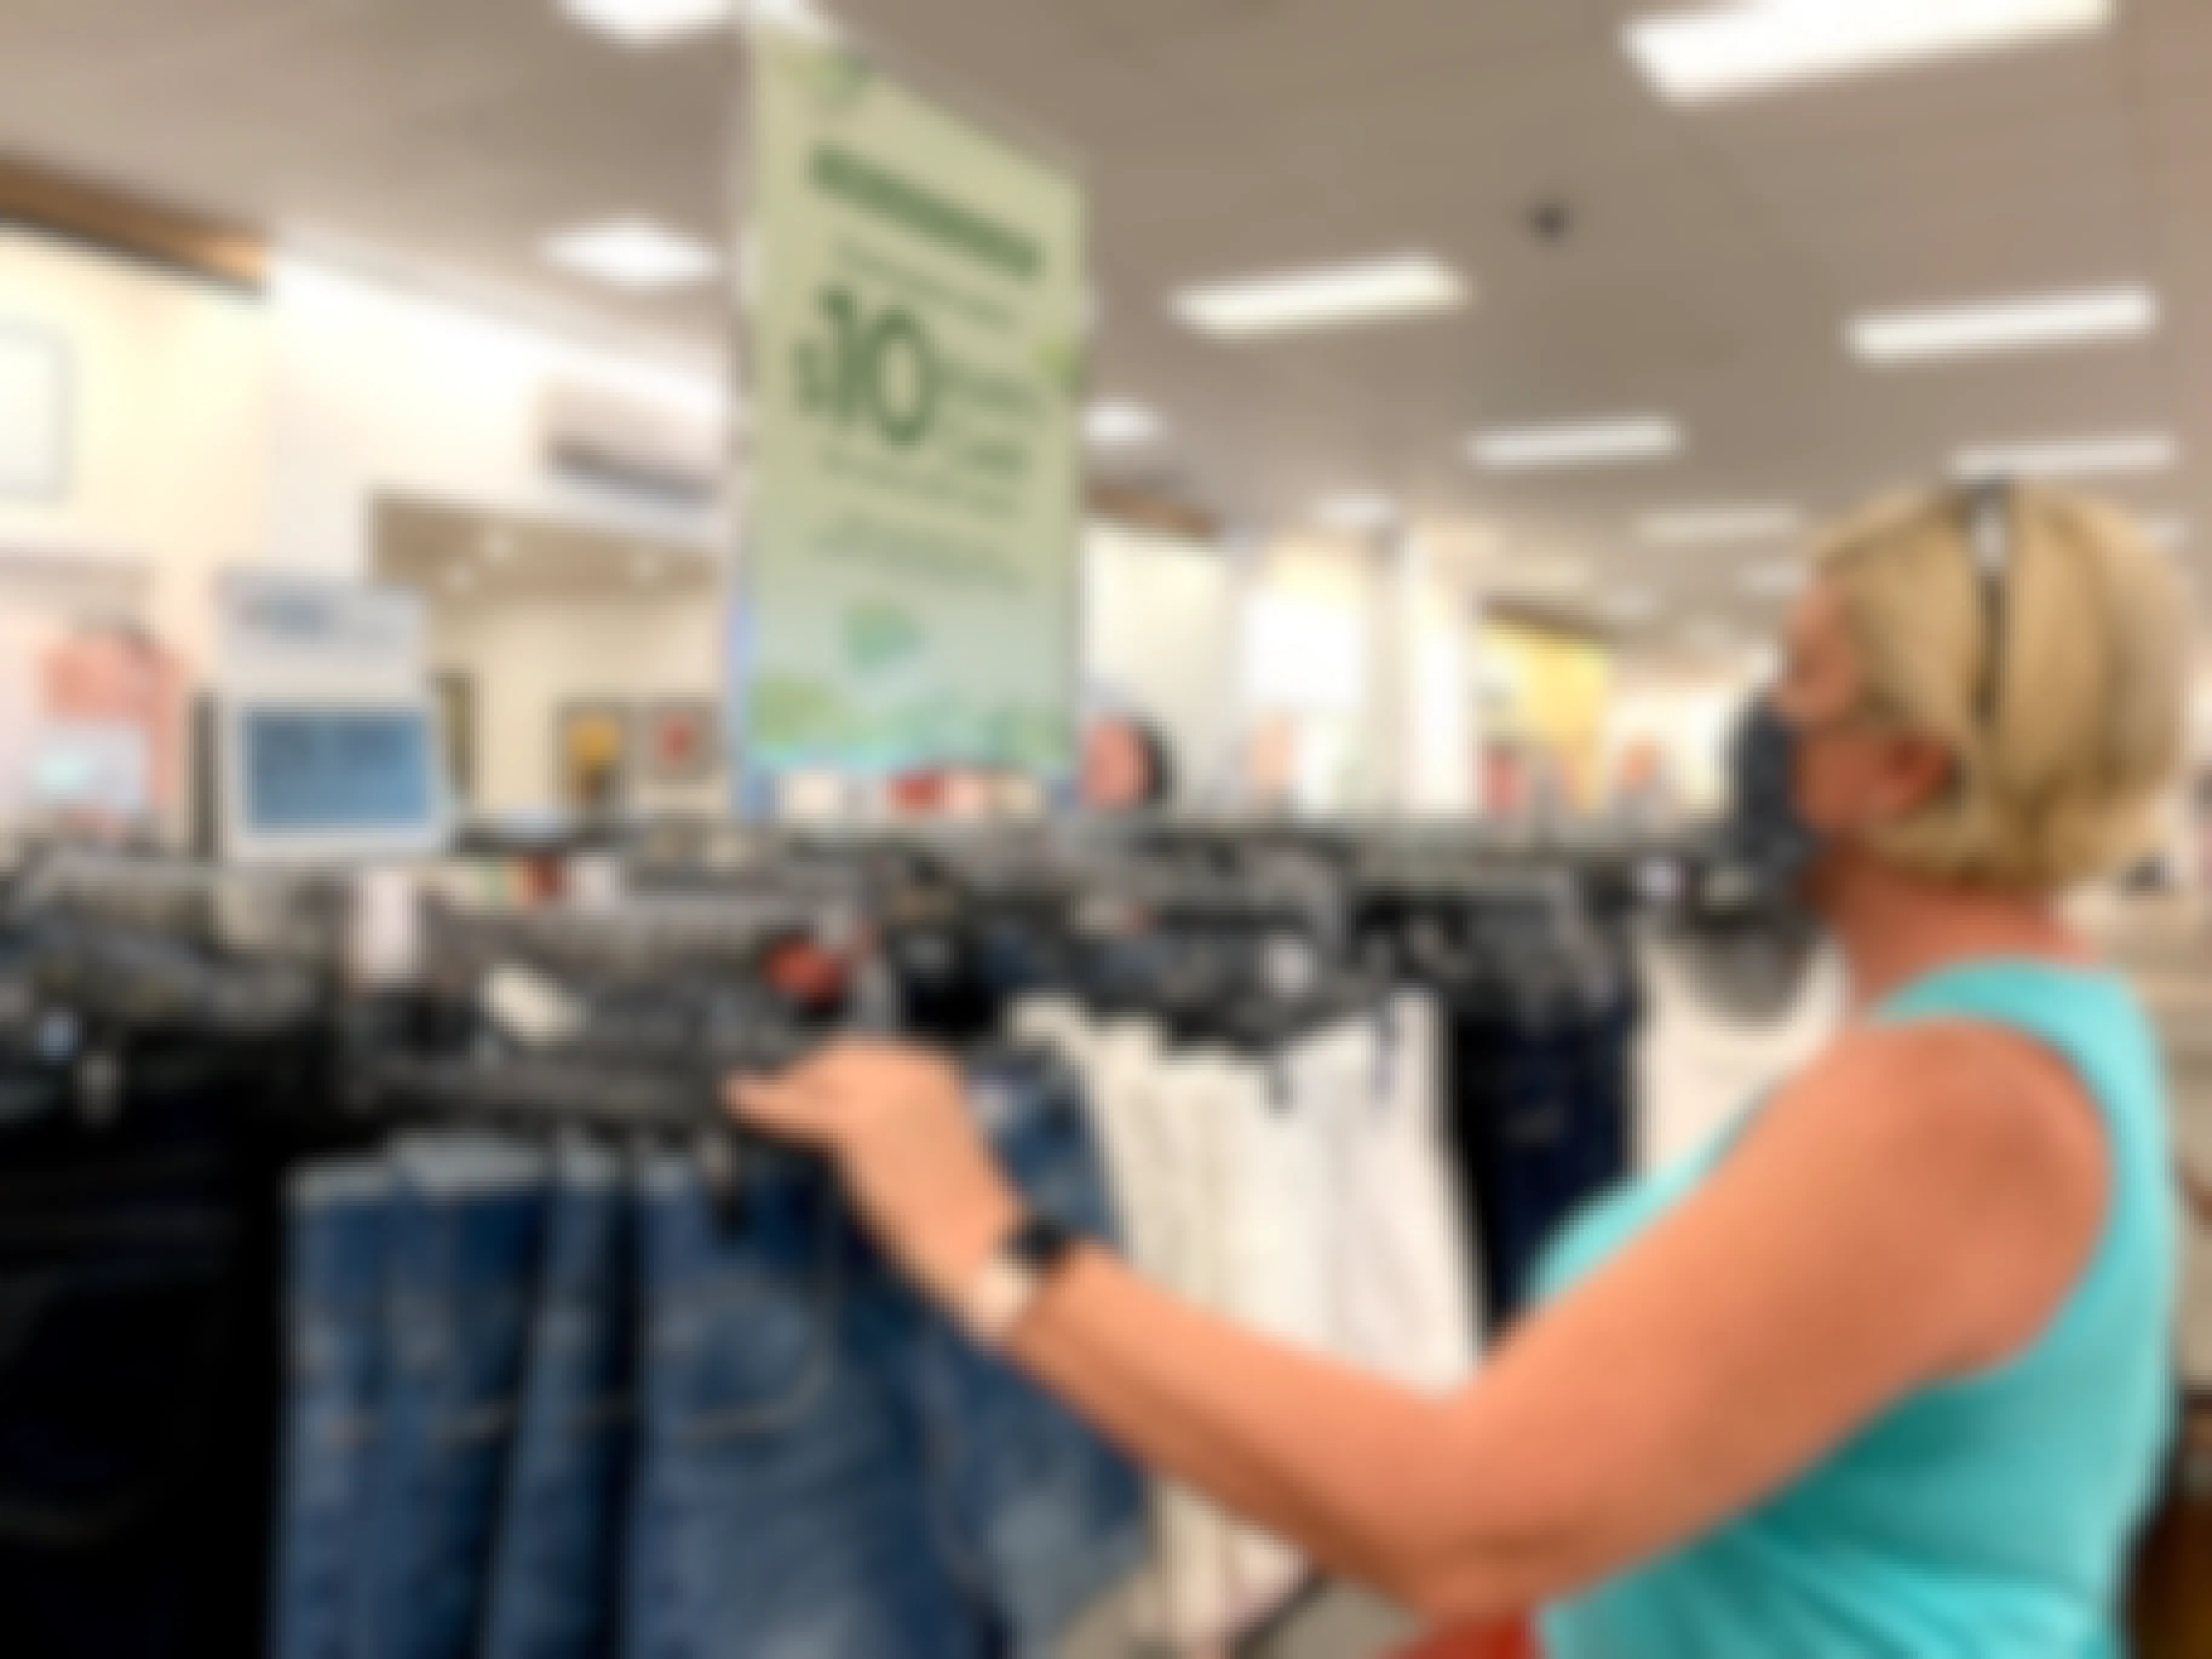 Woman looking at kohls cash sign on hanging display rack while holding jean shorts